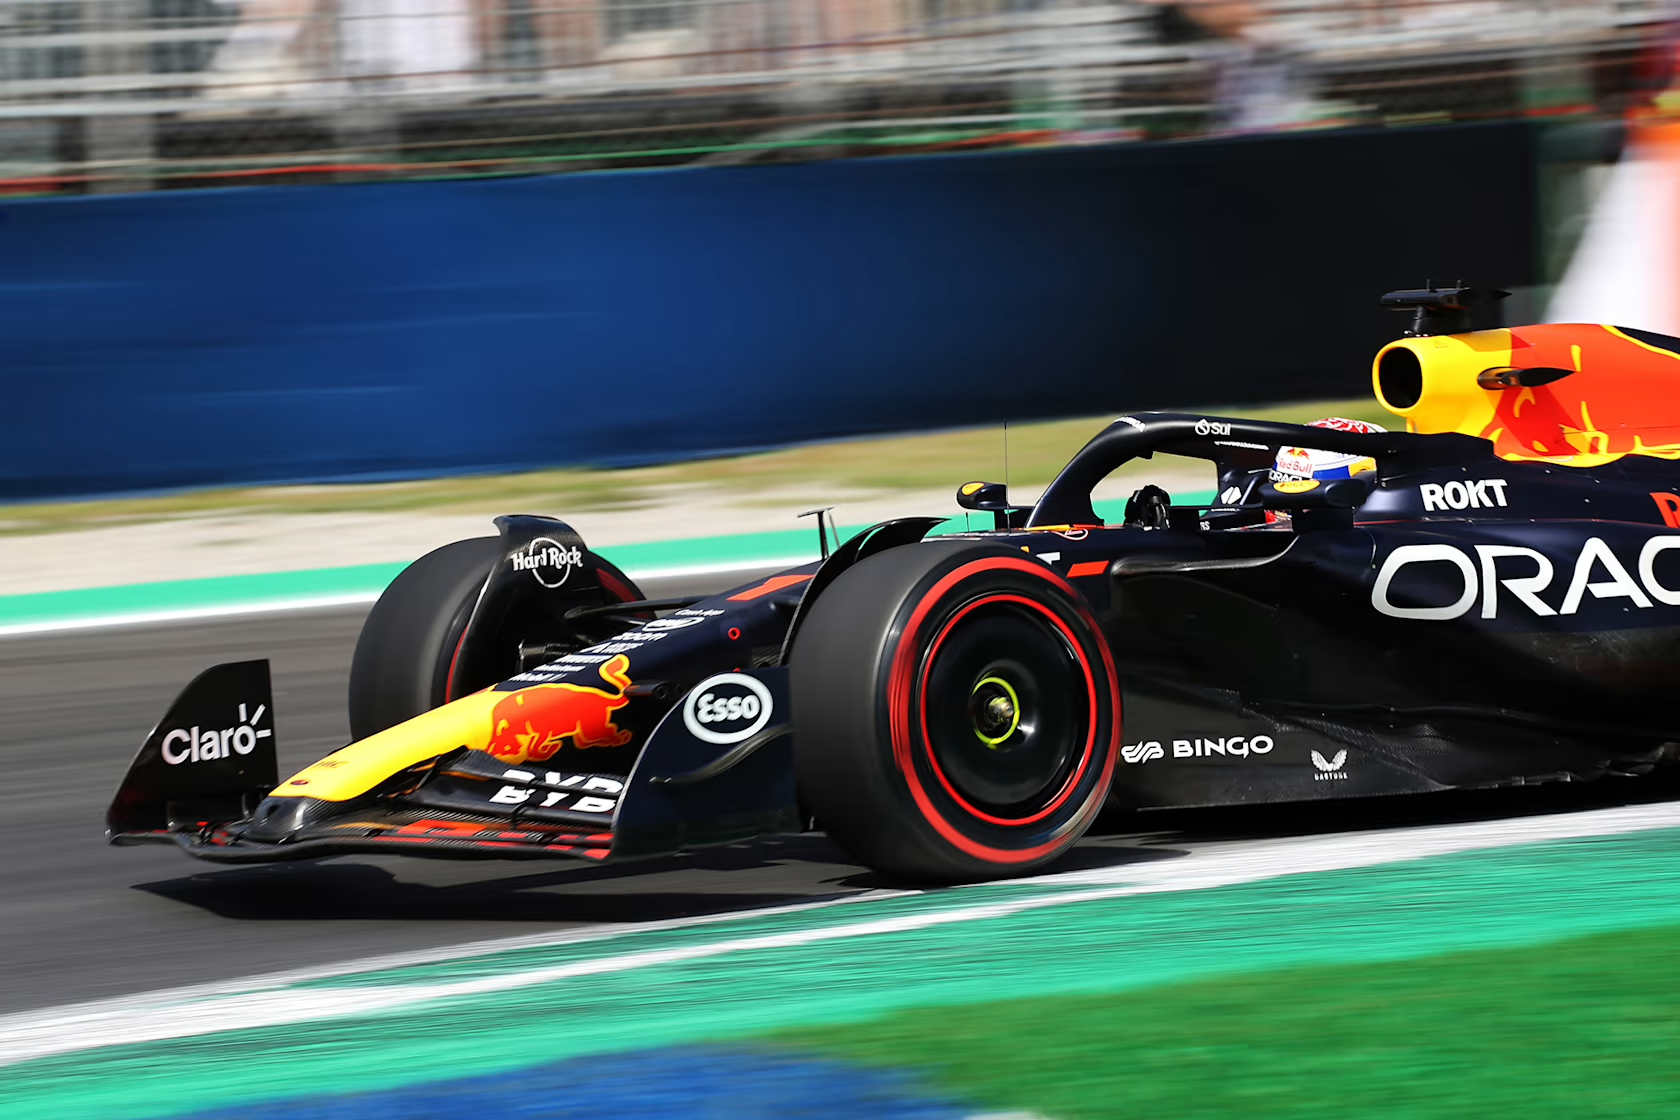 BINGO Proudly Sponsoring Oracle Red Bull Racing At The Japanese Grand Prix